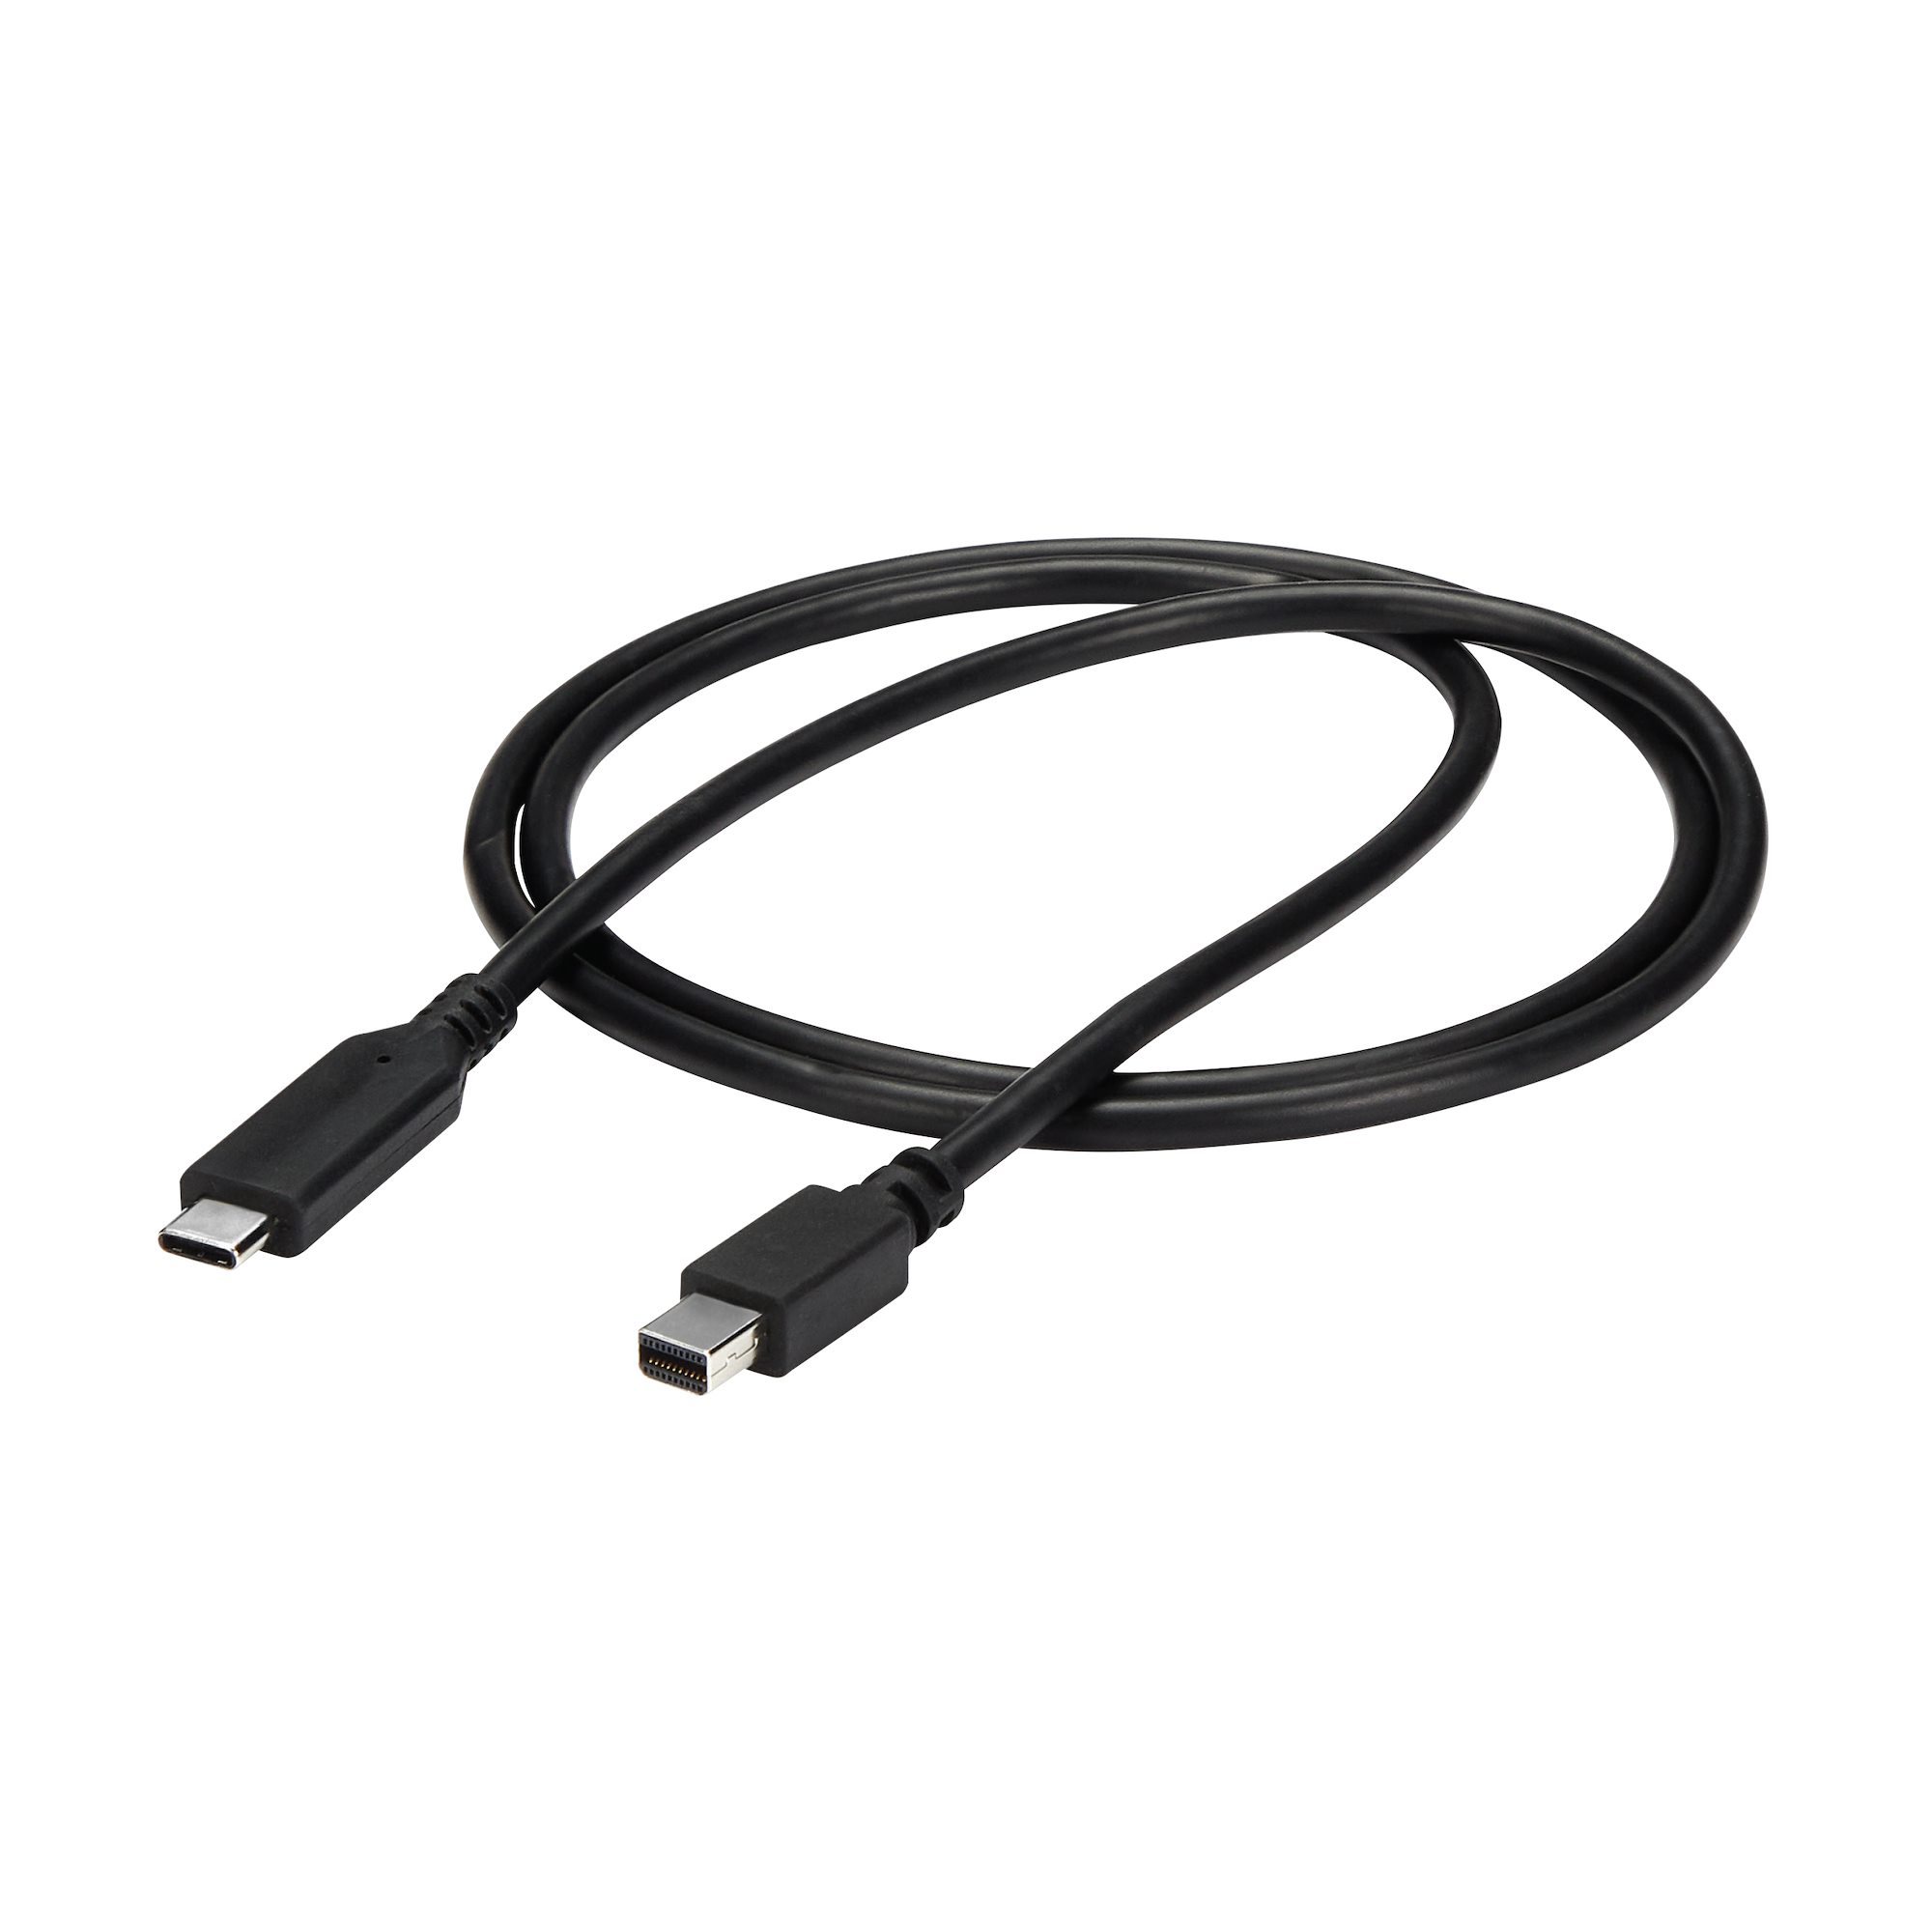 3.3ft/1m USB C to DisplayPort 1.4 Cable - 8K/5K/4K USB Type-C to DP 1.4 Alt  Mode Video Adapter Converter - HBR3/HDR/DSC - 8K 60Hz DP Monitor Cable 